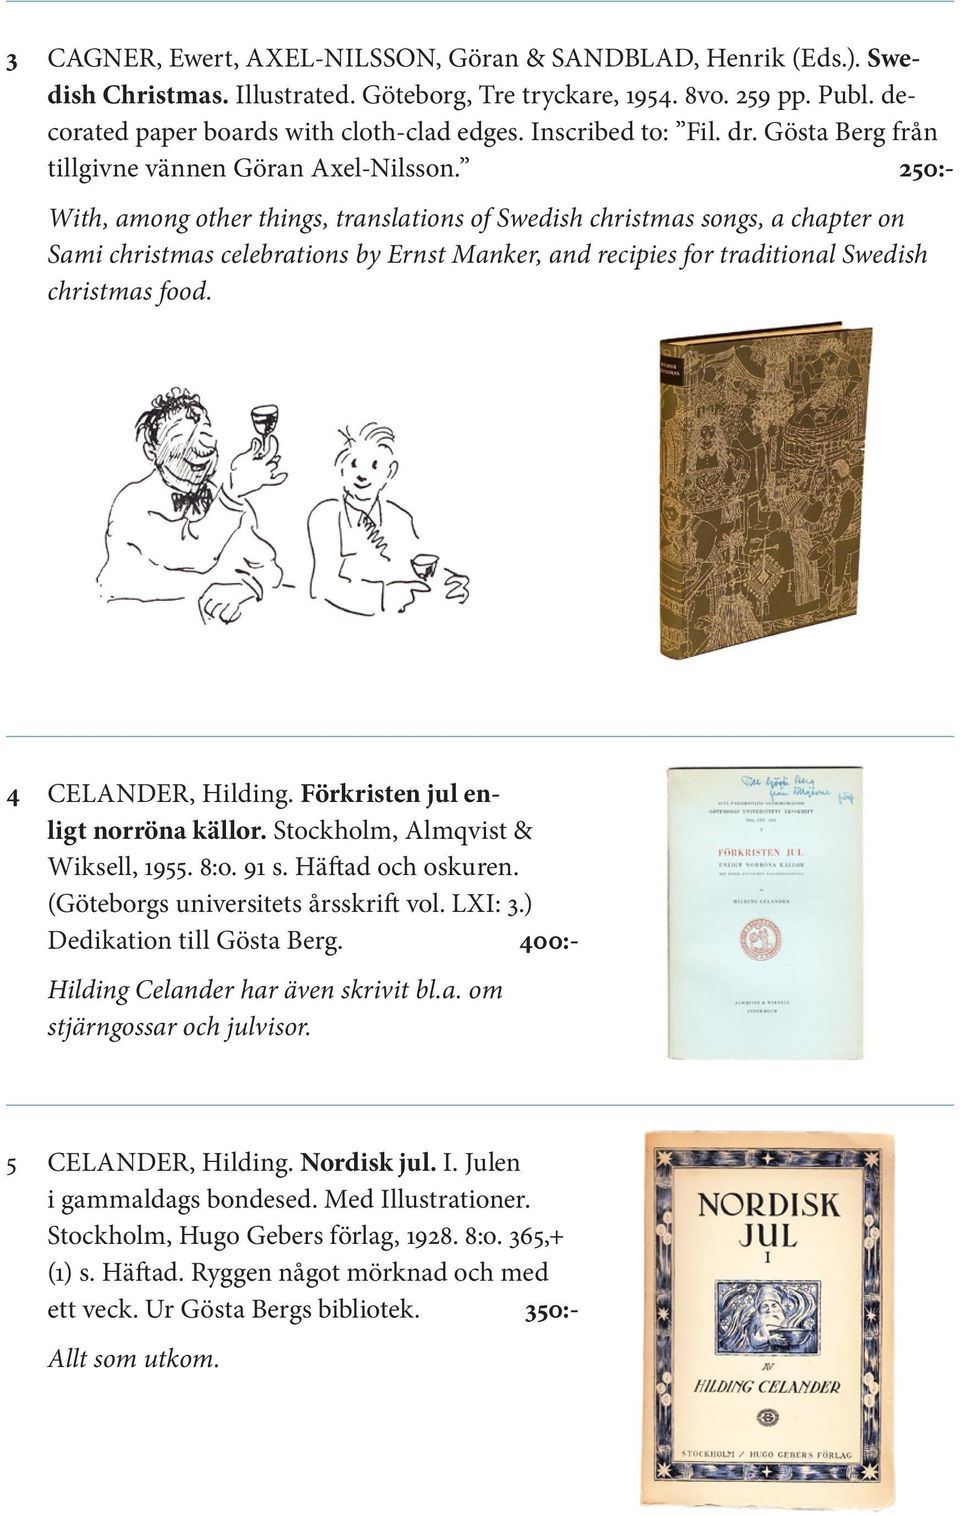 250:- With, among other things, translations of Swedish christmas songs, a chapter on Sami christmas celebrations by Ernst Manker, and recipies for traditional Swedish christmas food.